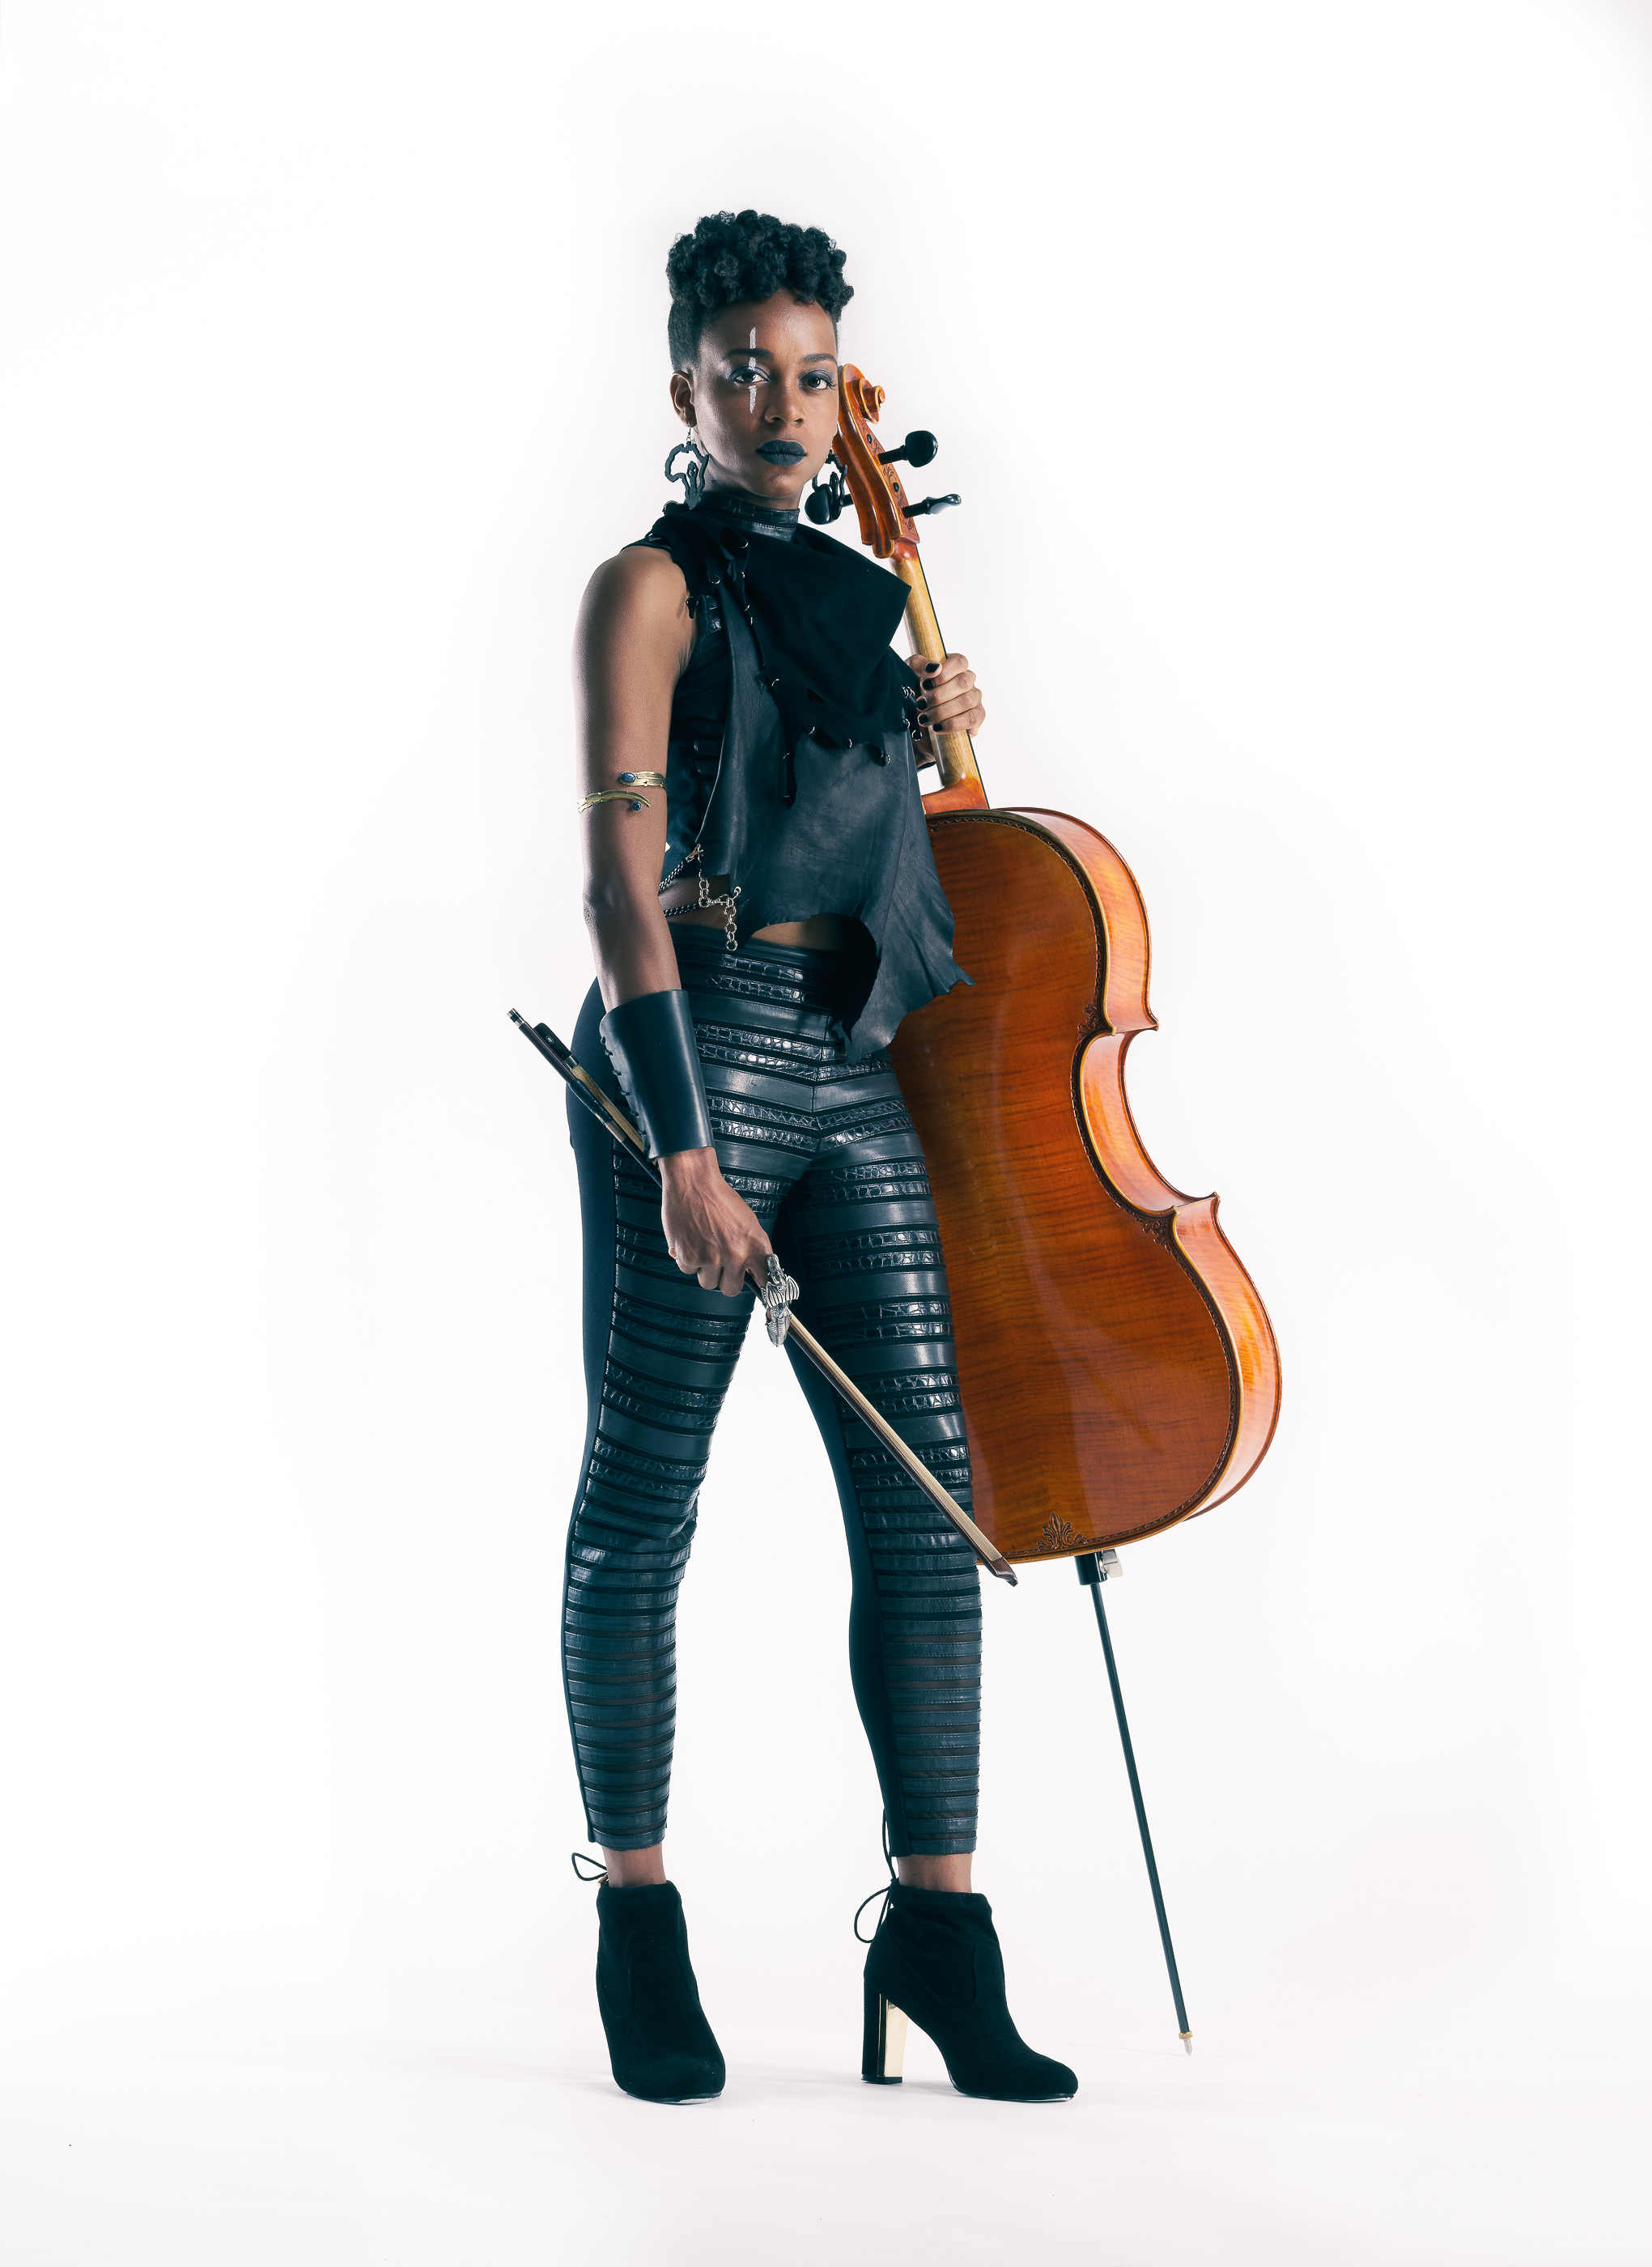 Singer, songwriter, cellist and composer, Ayanna Witter-Johnson feature in the line-up for Wiltshire Creatives new season